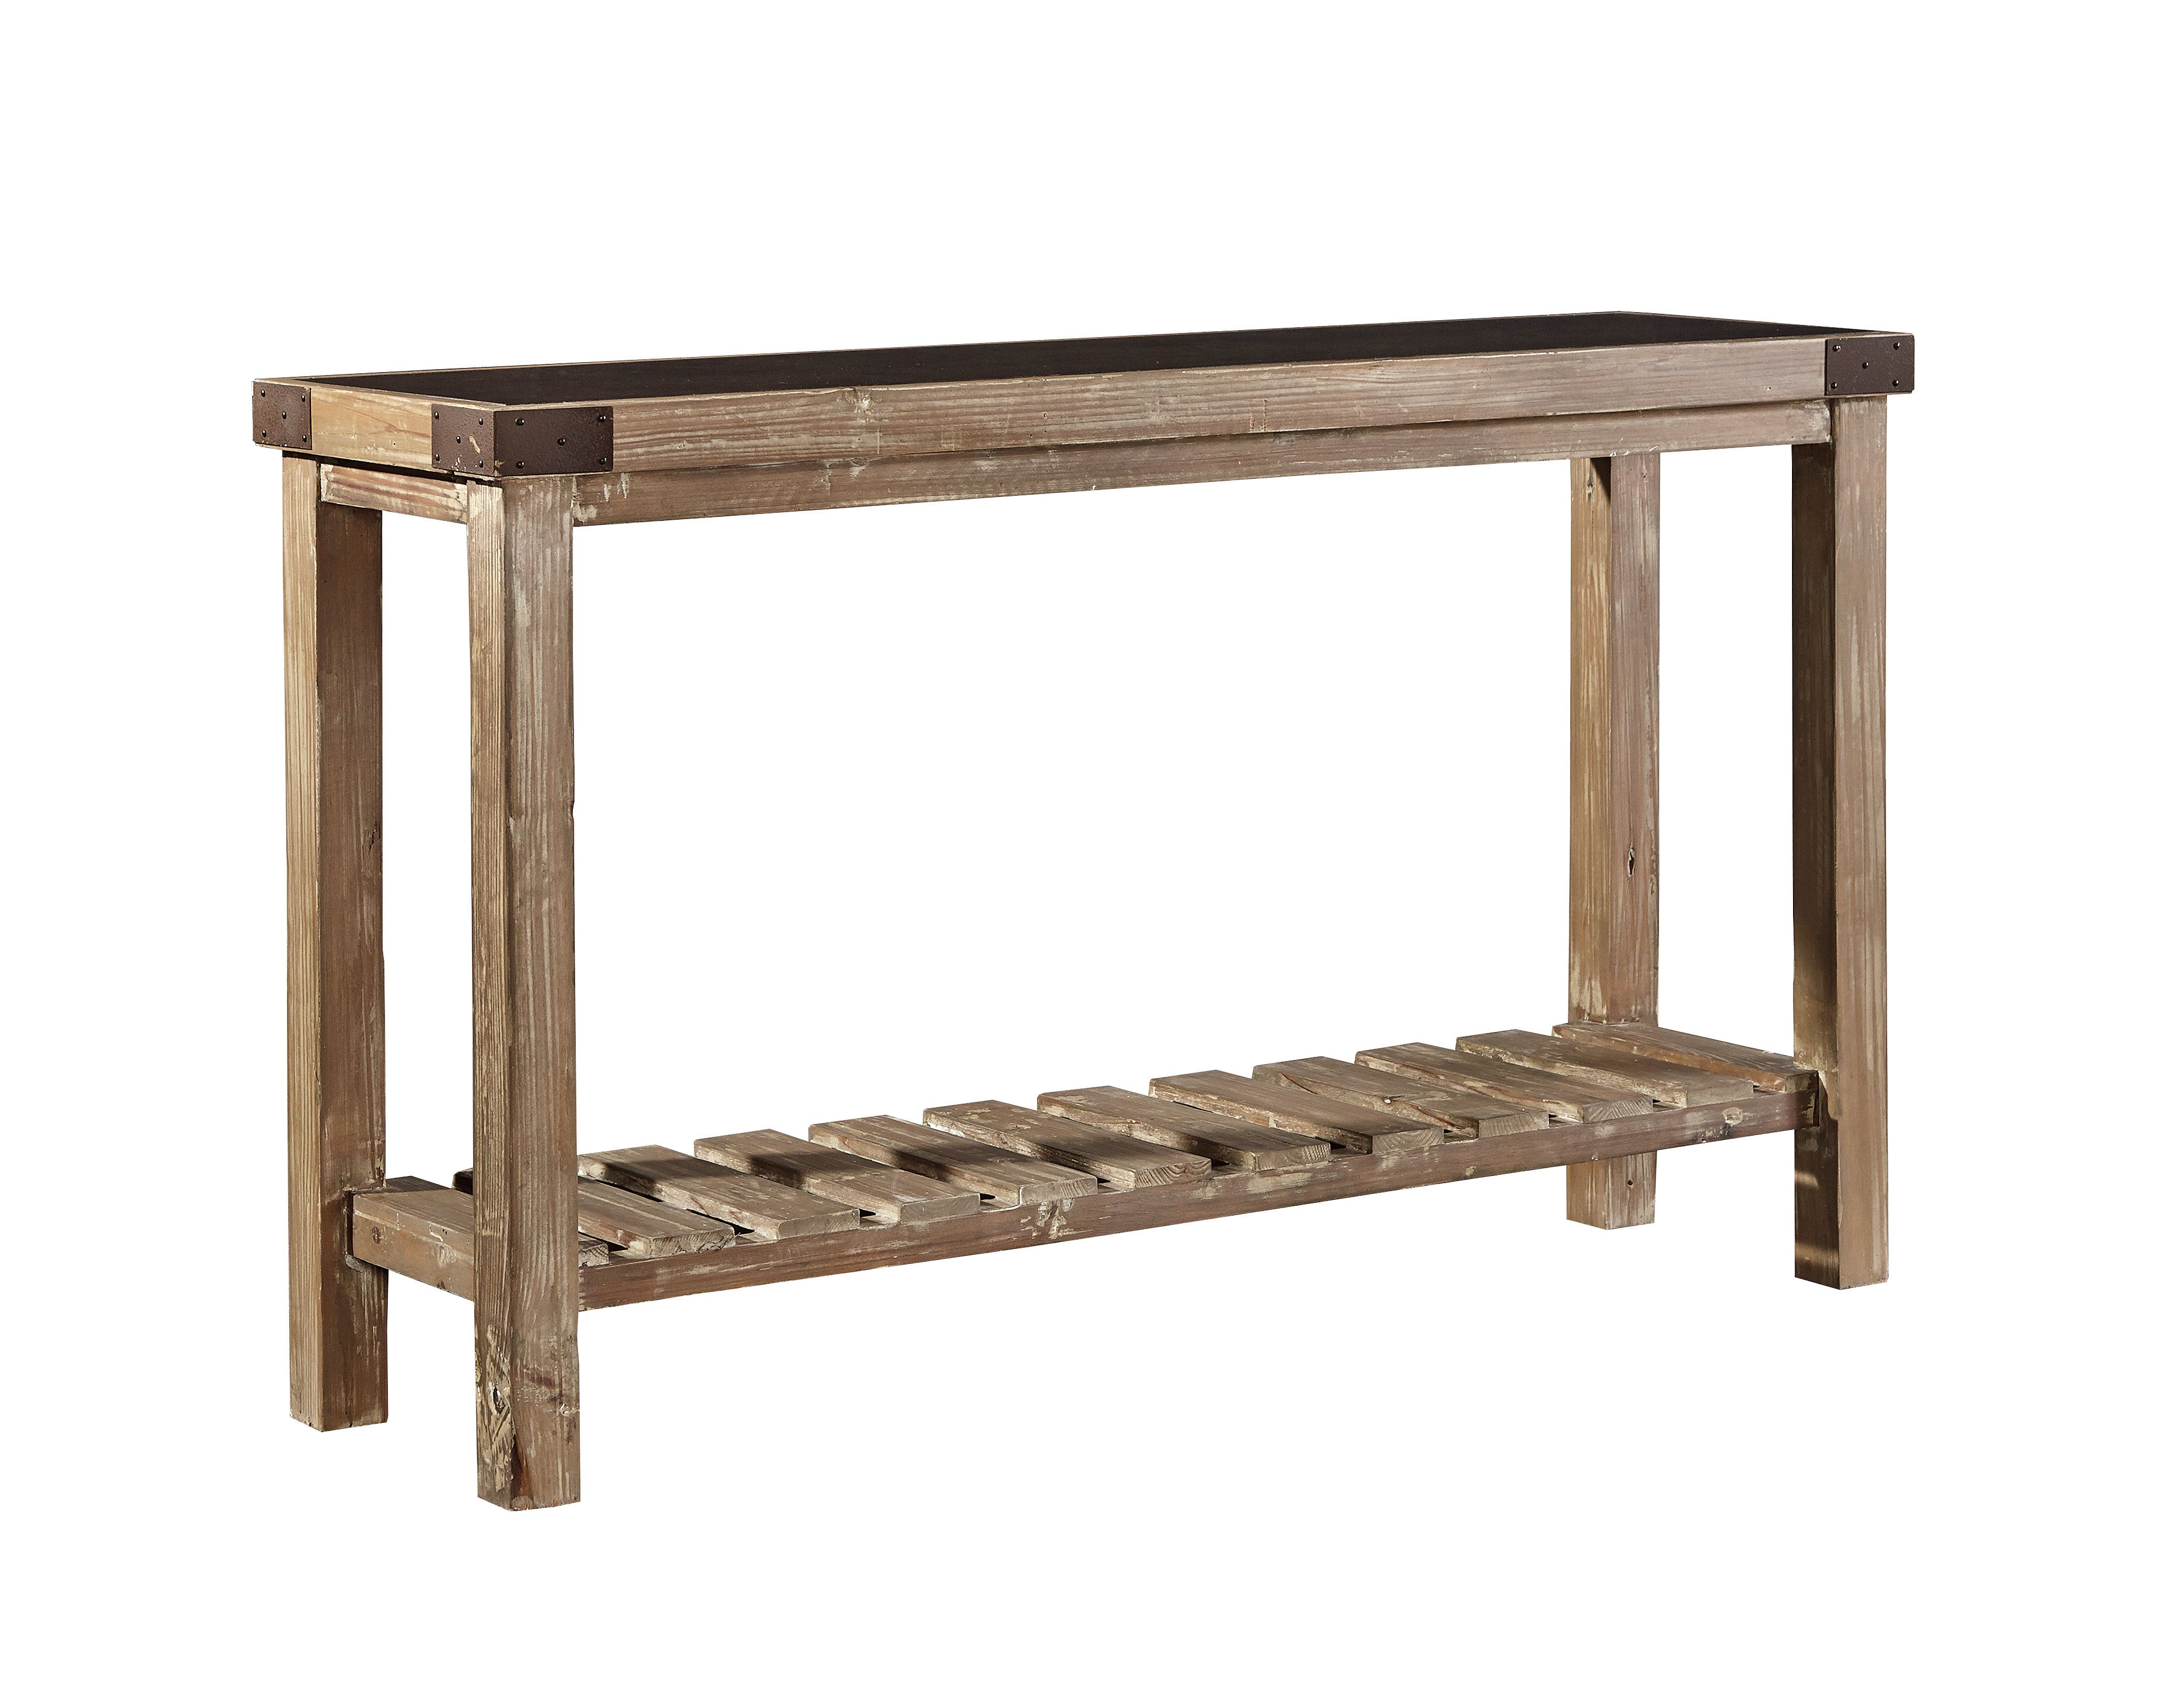 Gracie Oaks Warkworth Bluestone Top Console Table | Wayfair Pertaining To Bluestone Console Tables (View 5 of 30)